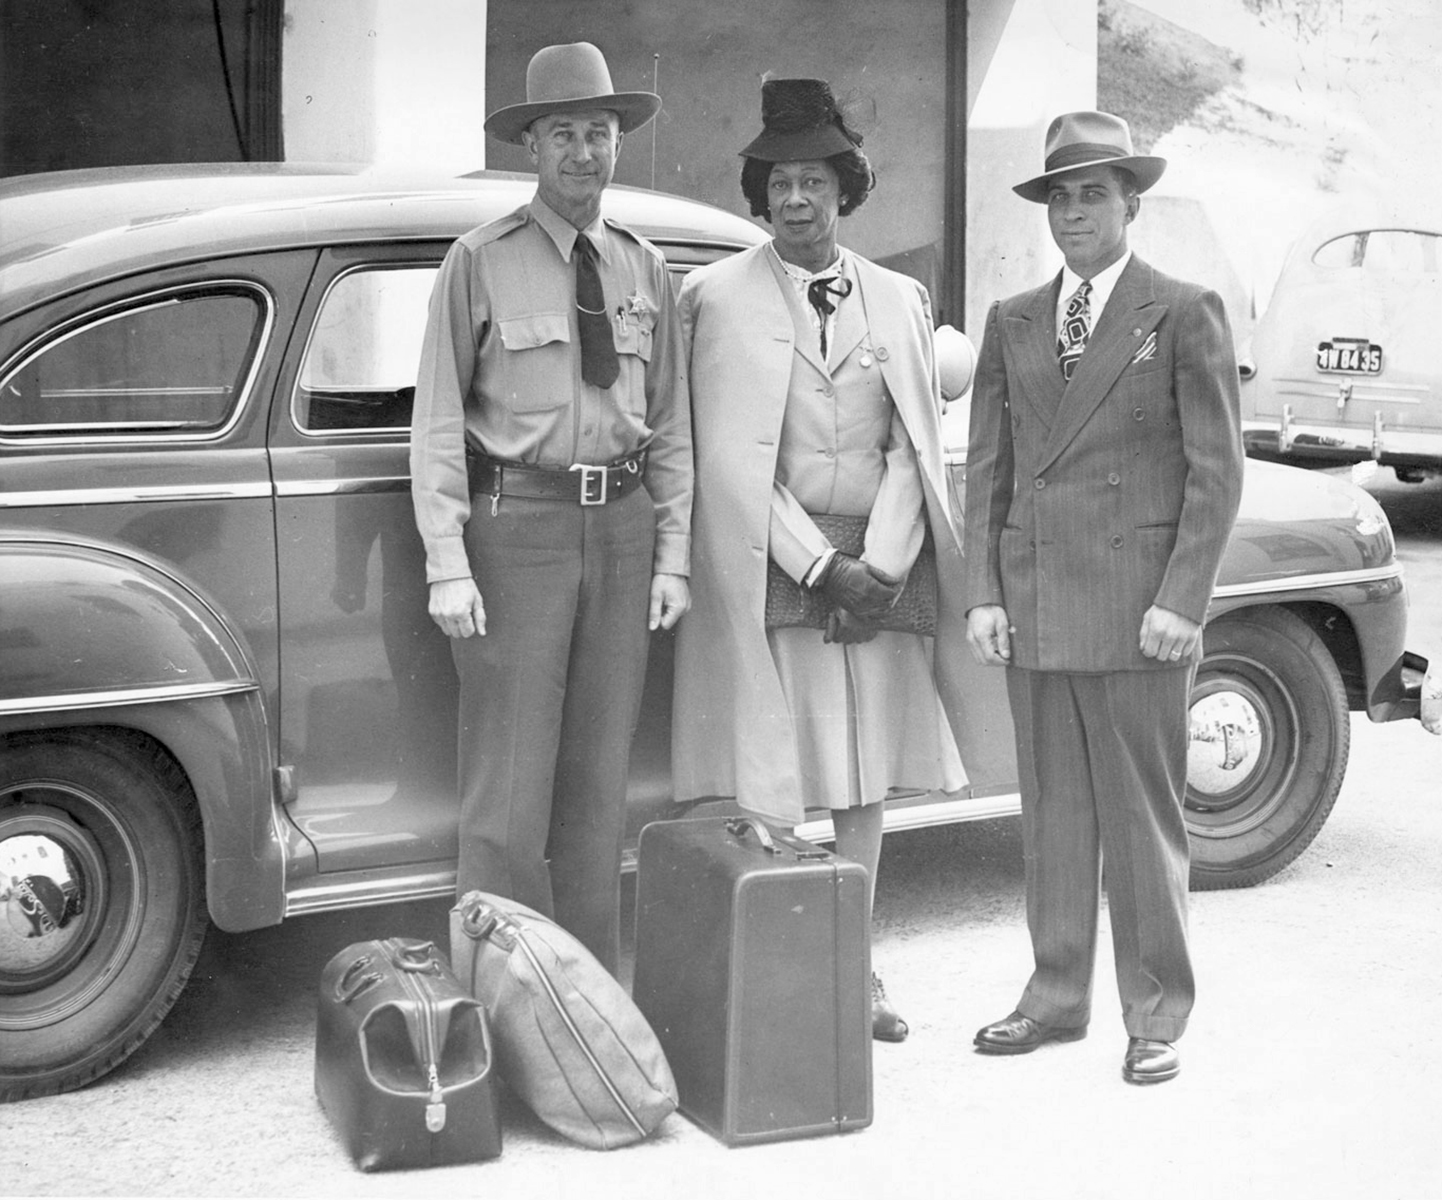 Lucy Hicks stands with two deputy sheriffs in front of an automobile. Left to right: Deputy Sheriff (in uniform with hat) H.E. Bowman, Lucy Hicks Anderson, Deputy Sheriff Charles Salig. Lucy Hicks wears a skirt suit with a coat draped over her shoulders and a hat, and Charles Salig wears a suit, tie, and hat. Three pieces of luggage lay at their feet.